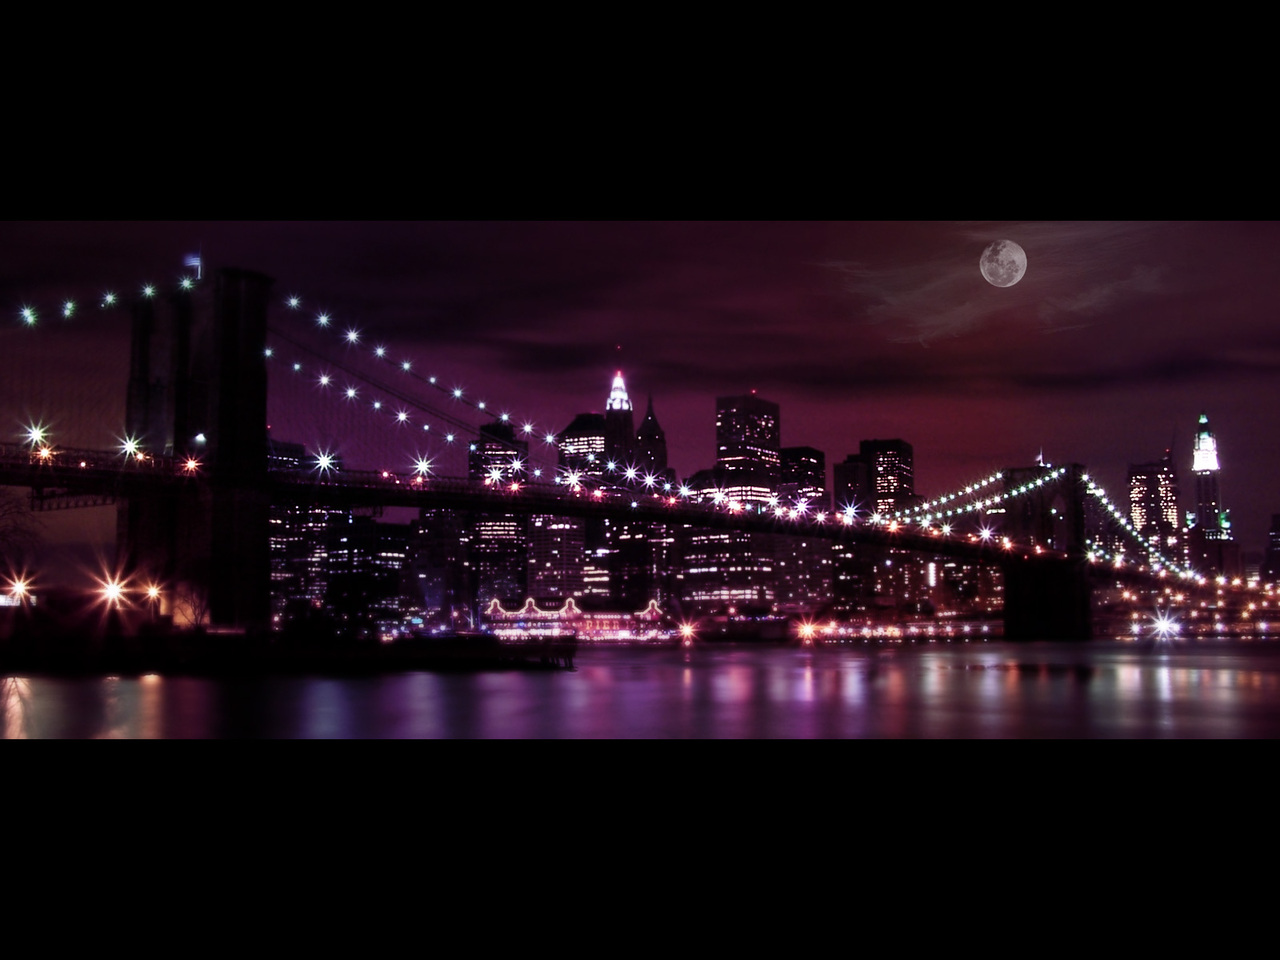 City Lights Hd Wallpapers in Movies Imagescicom